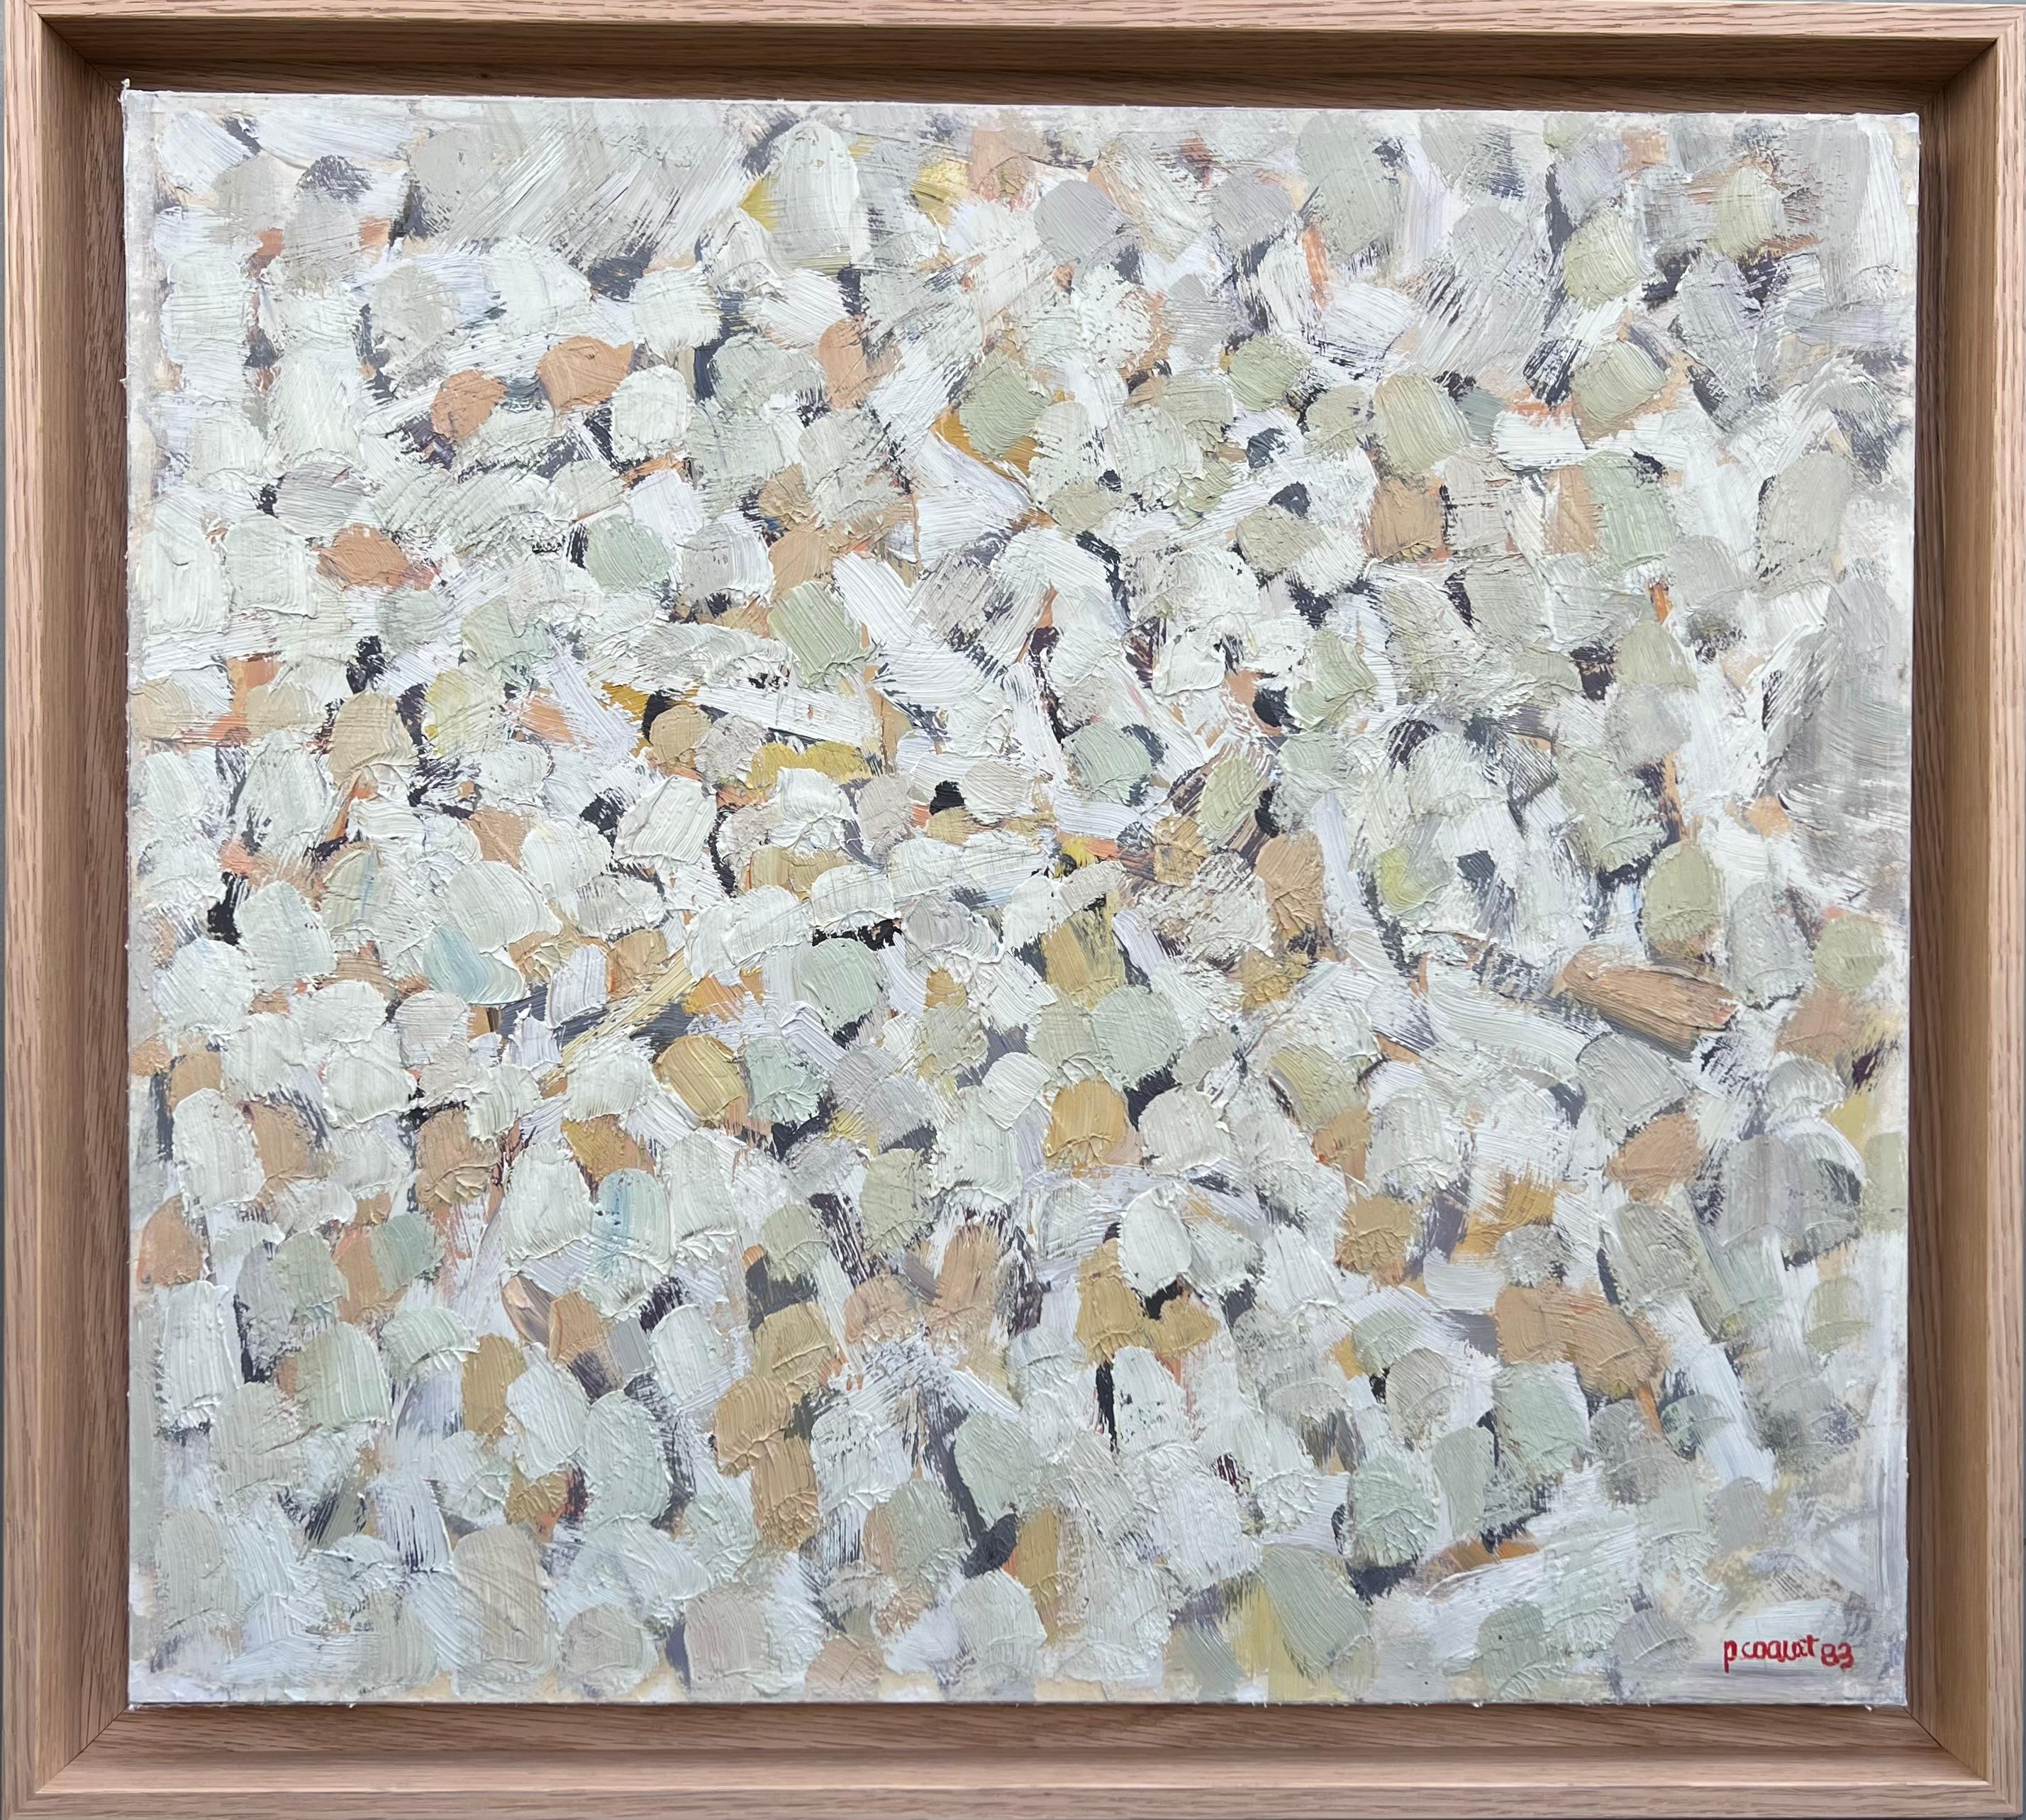 Pierre Coquet - Abstract Composition in white shades
Reference number A202
Framed with a natural oak floated frame
40 x 45 cm (45 x 50 cm frame included)
This work is painted with oil on a board.  It is signed  and dated 83 in the bottom